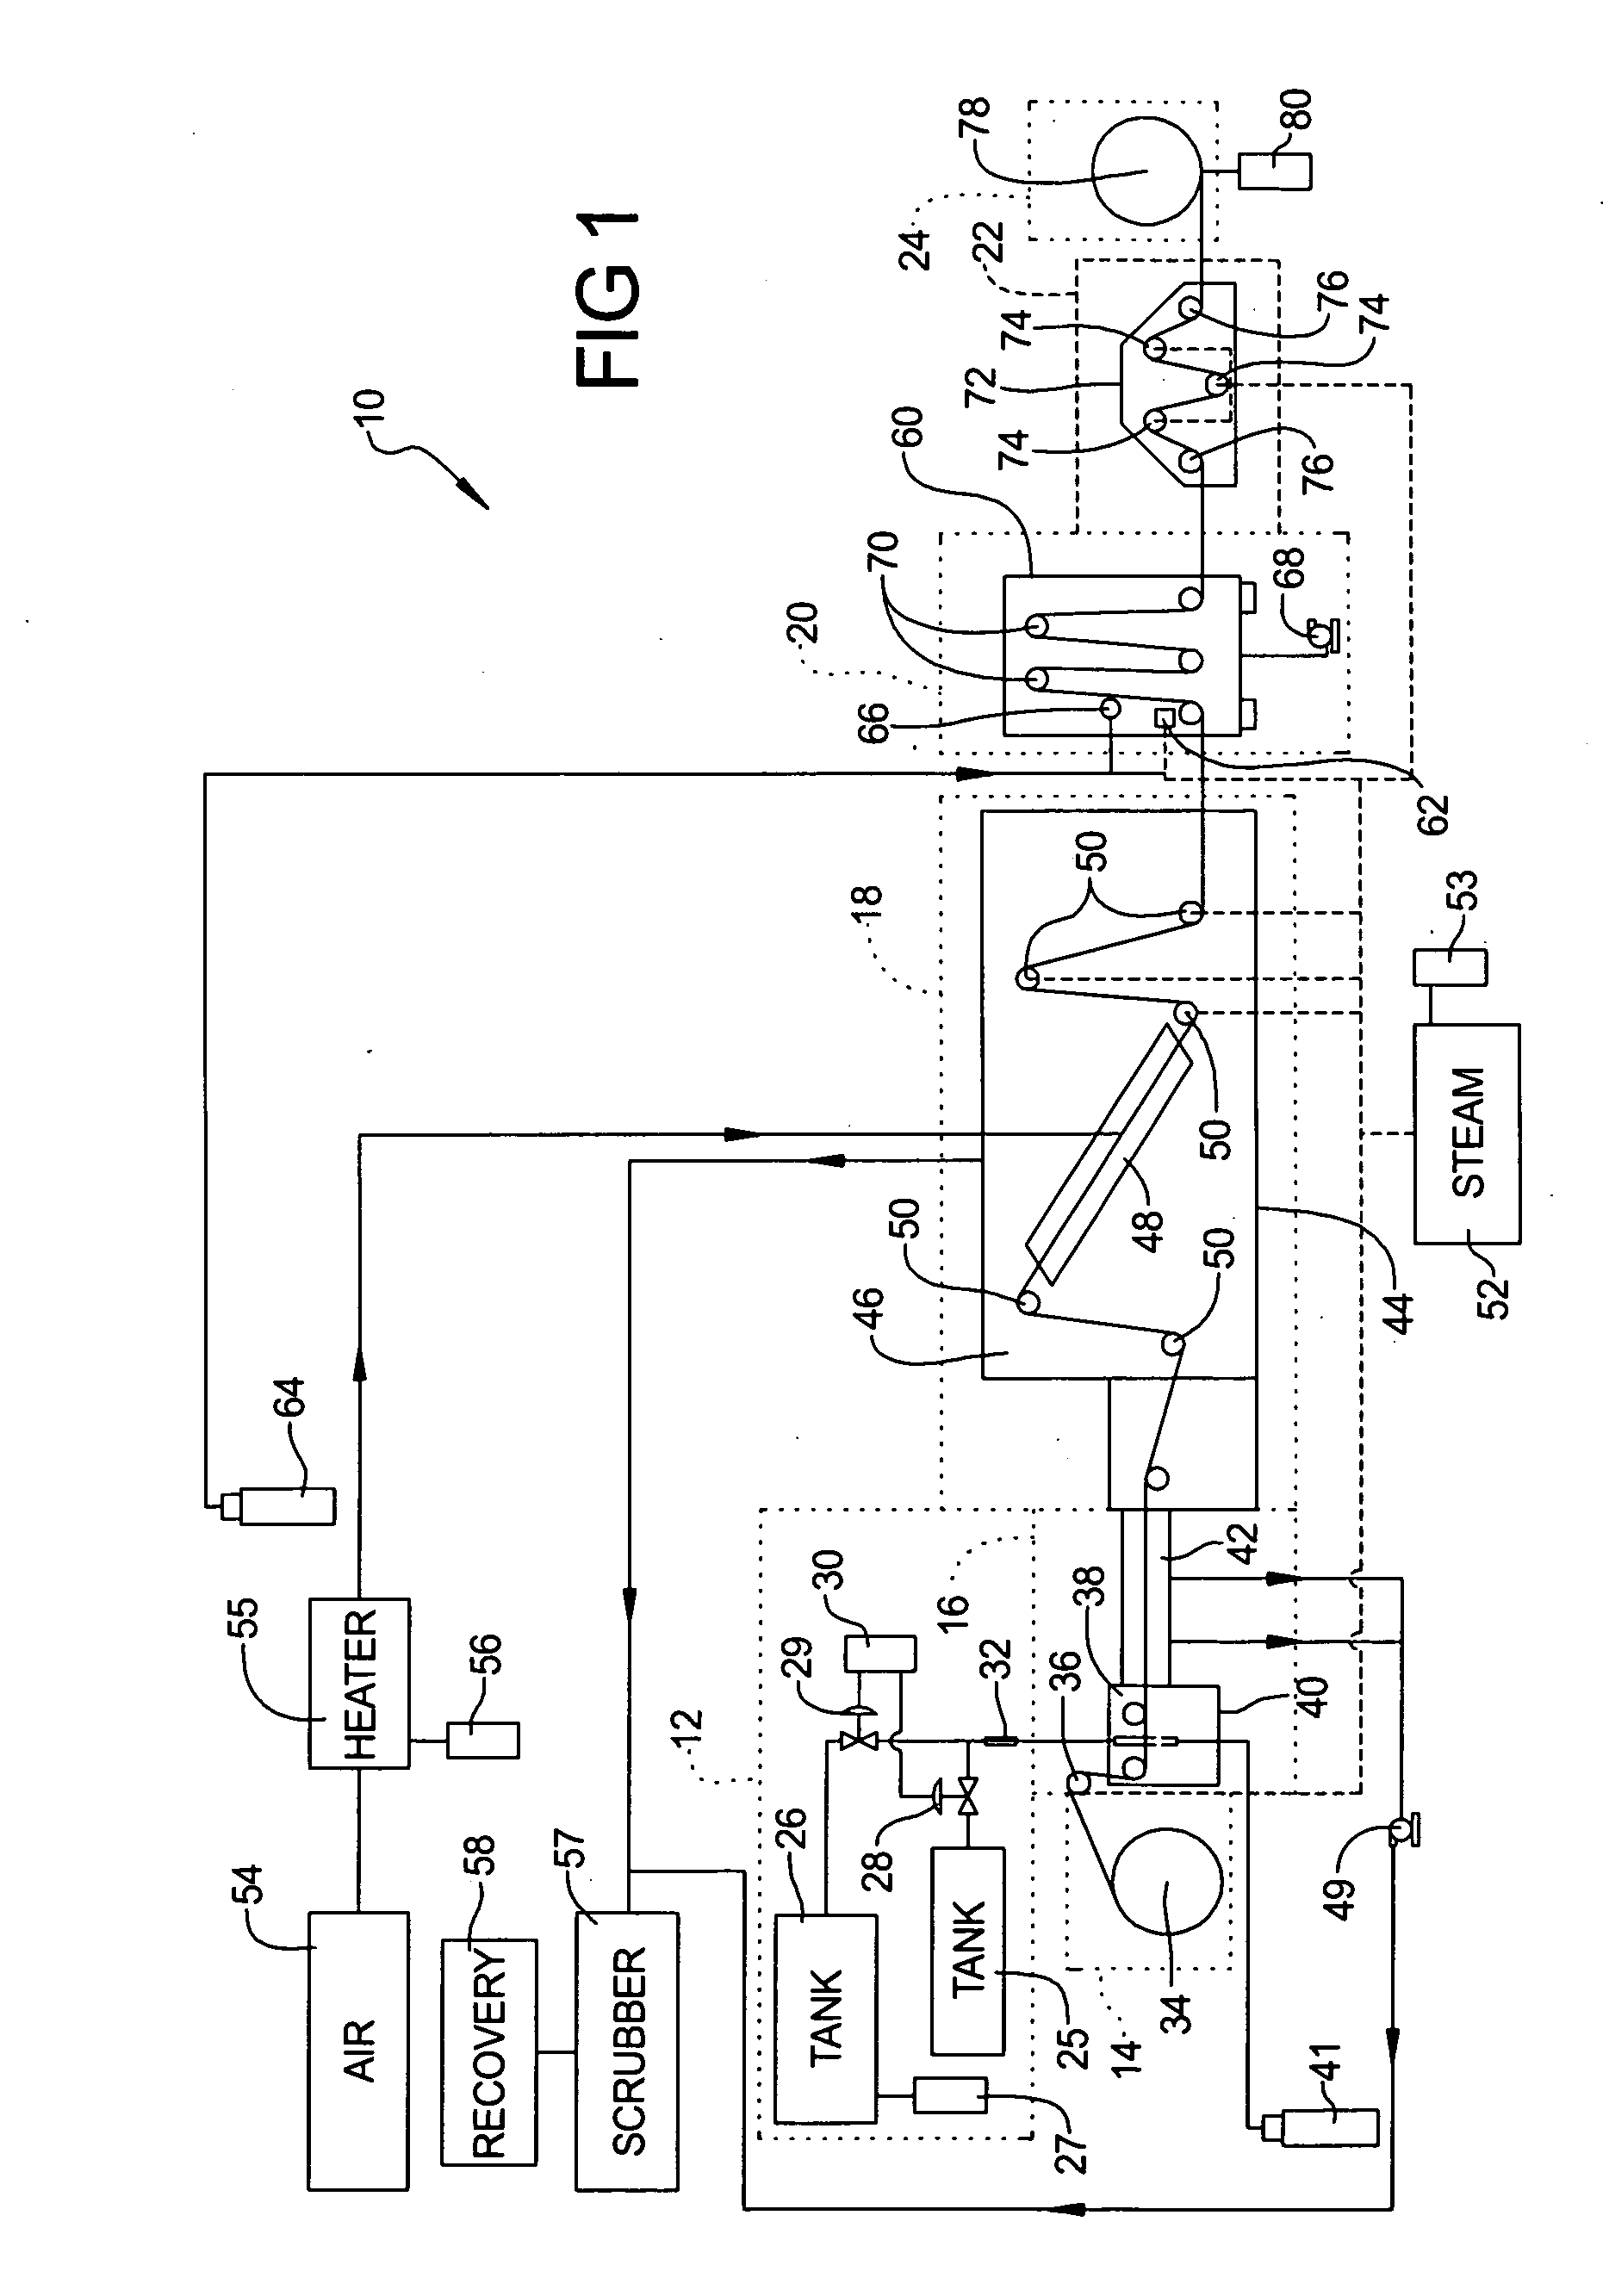 Apparatus and method for treating materials with compositions